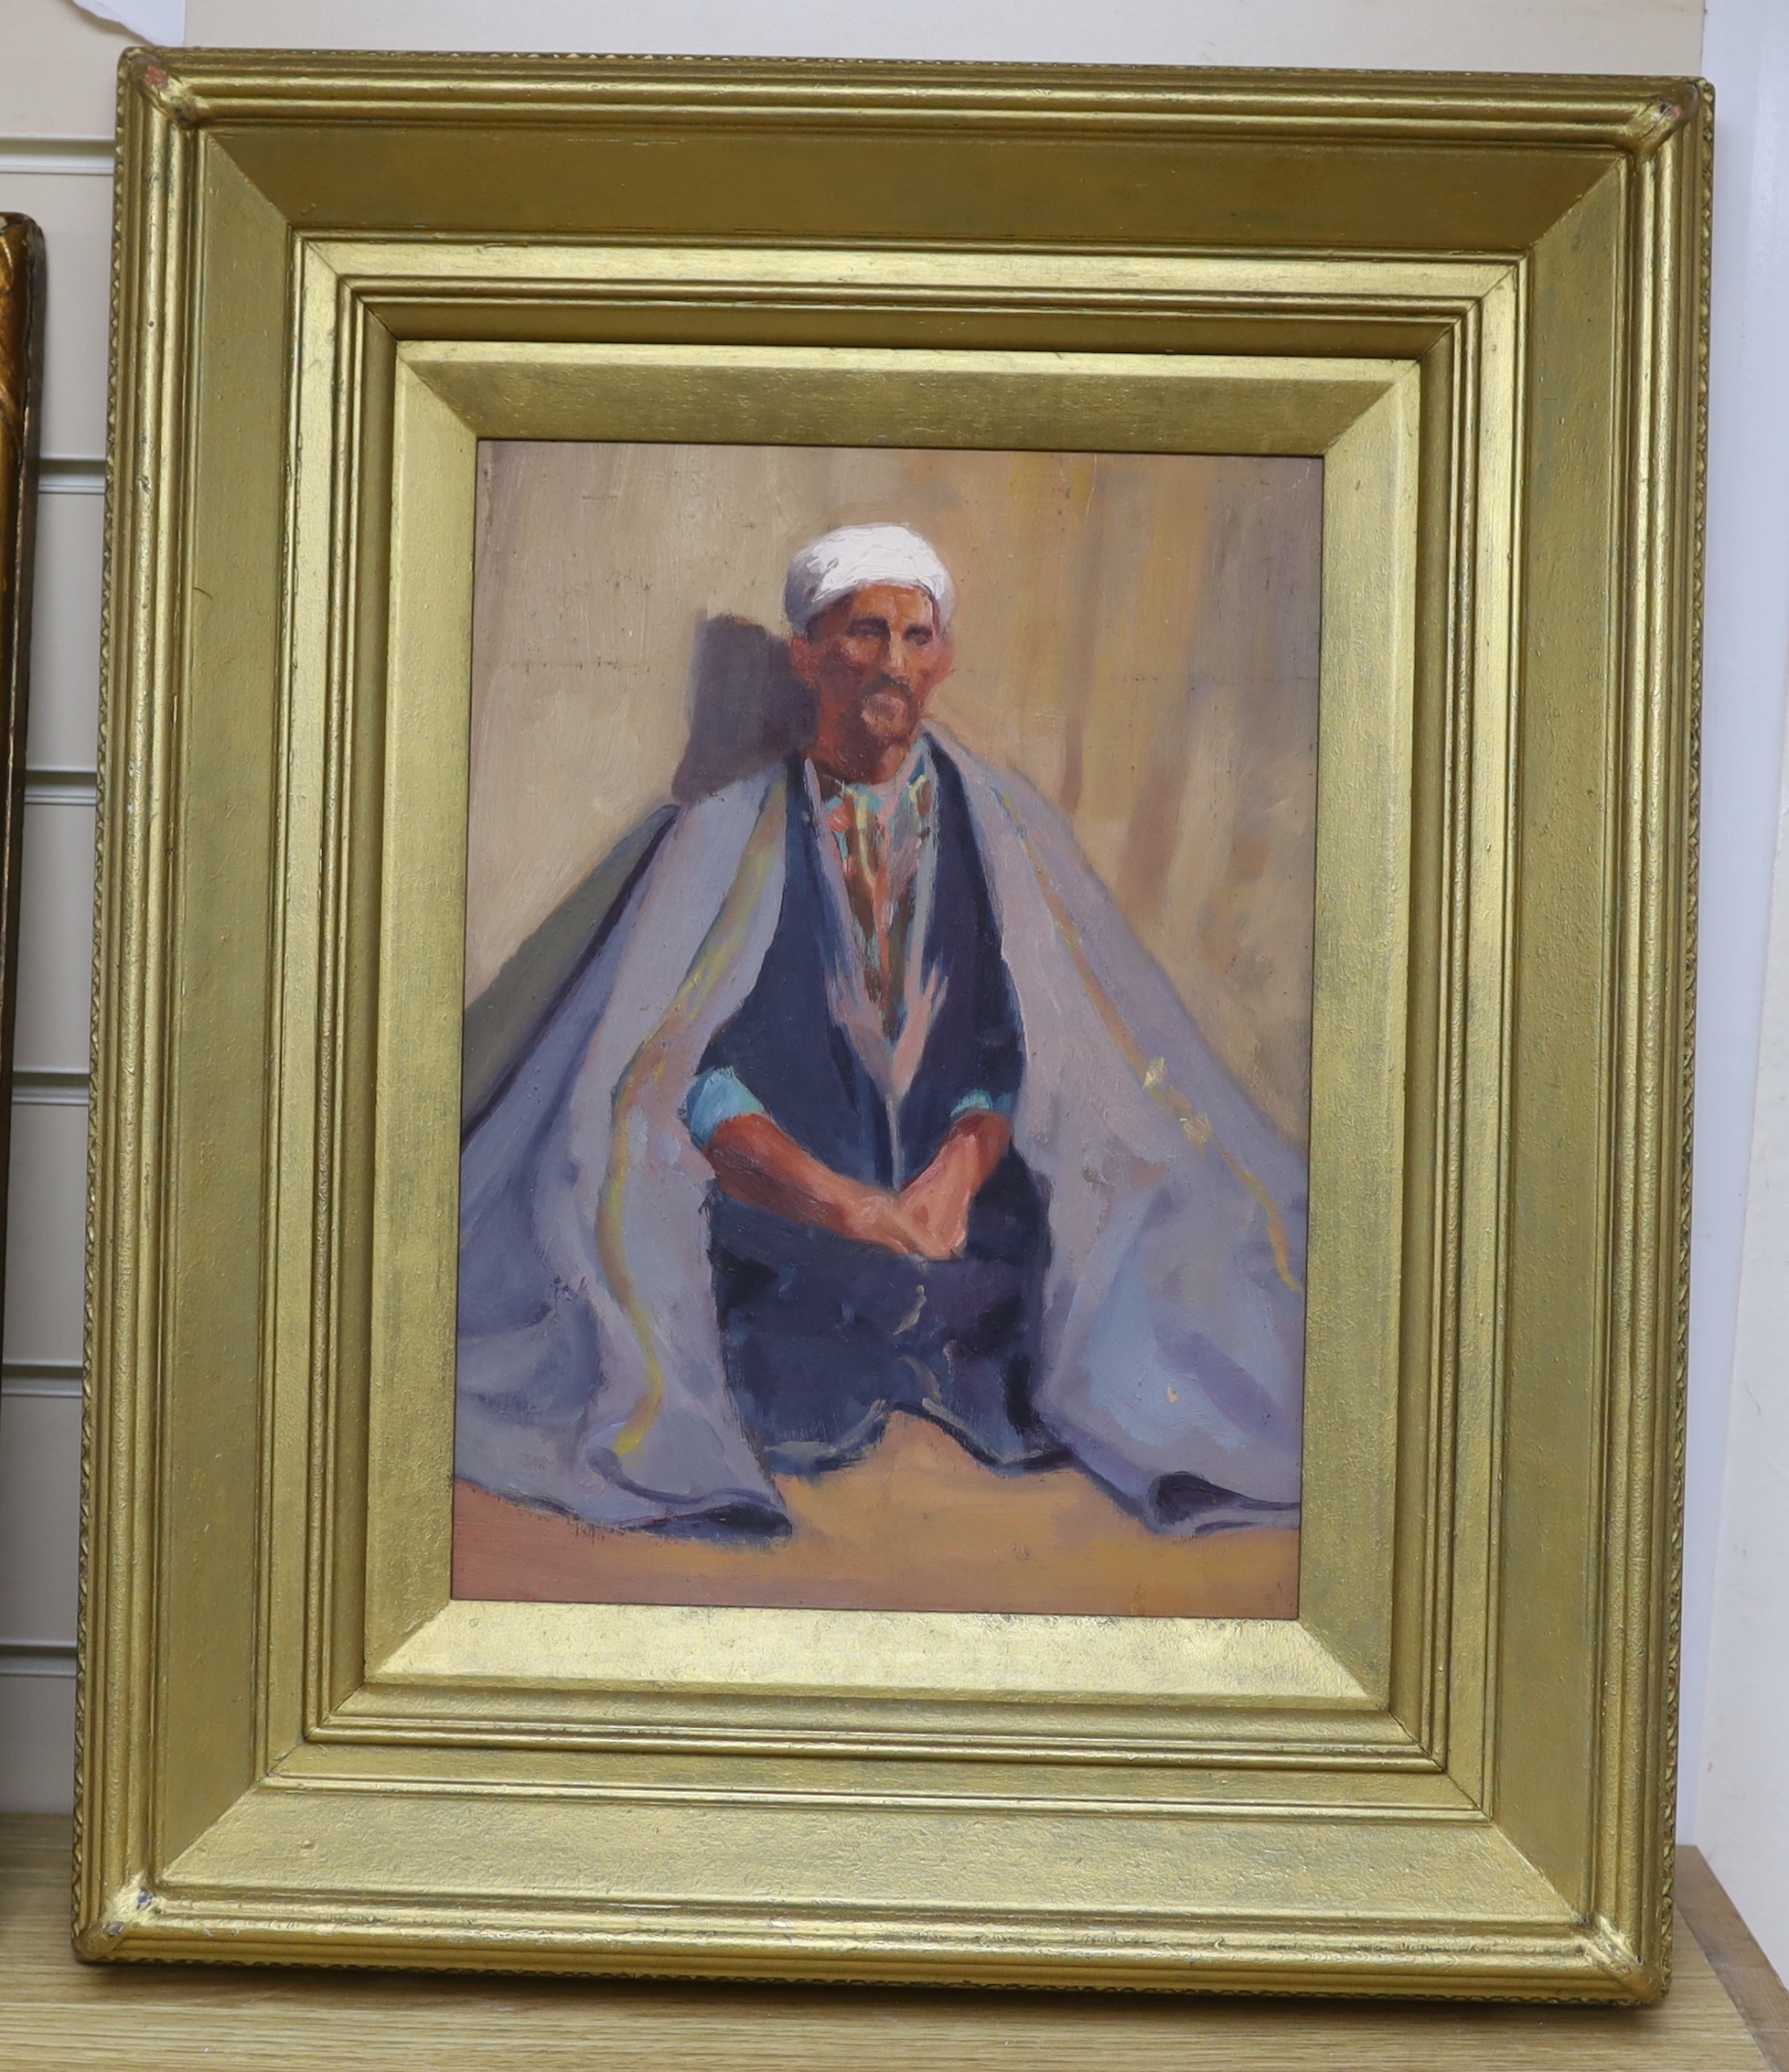 20th century Orientalist School, oil on board, Portrait of a seated Eastern gentleman in robes, unsigned, 36 x 26cm, gilt framed